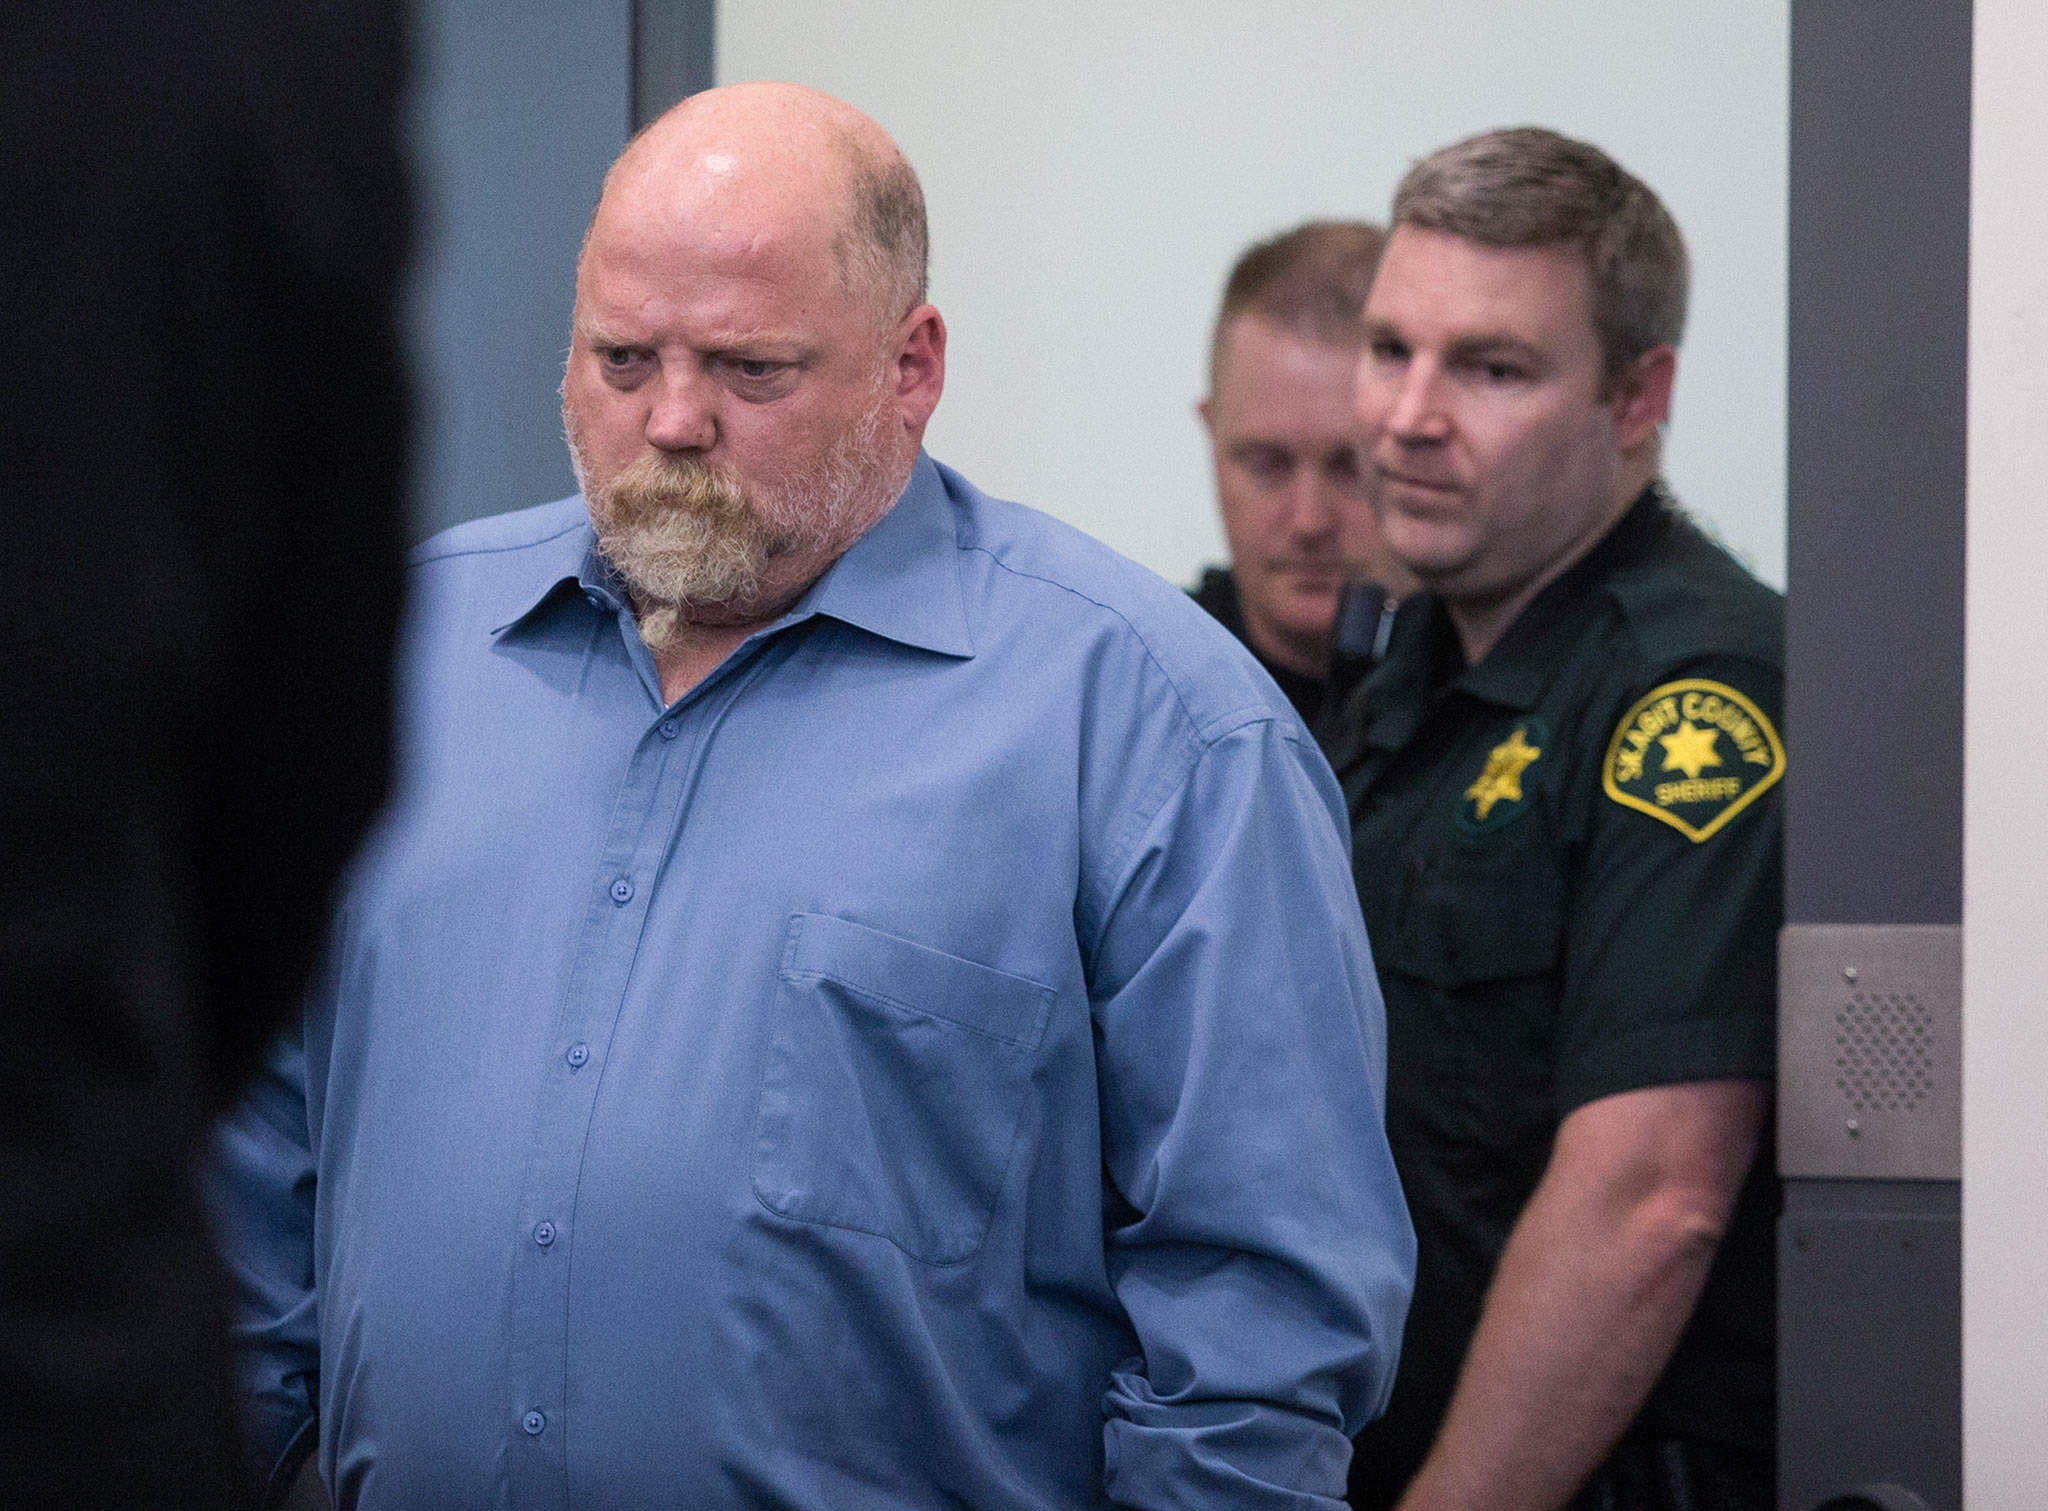 William Earl Talbott II, 55, of SeaTac, is led into court, on arraignment in the death of Tanya Van Cuylenborg in 1987, at the Skagit County Community Justice Center on May 18 in Mount Vernon. (Andy Bronson / Herald file)